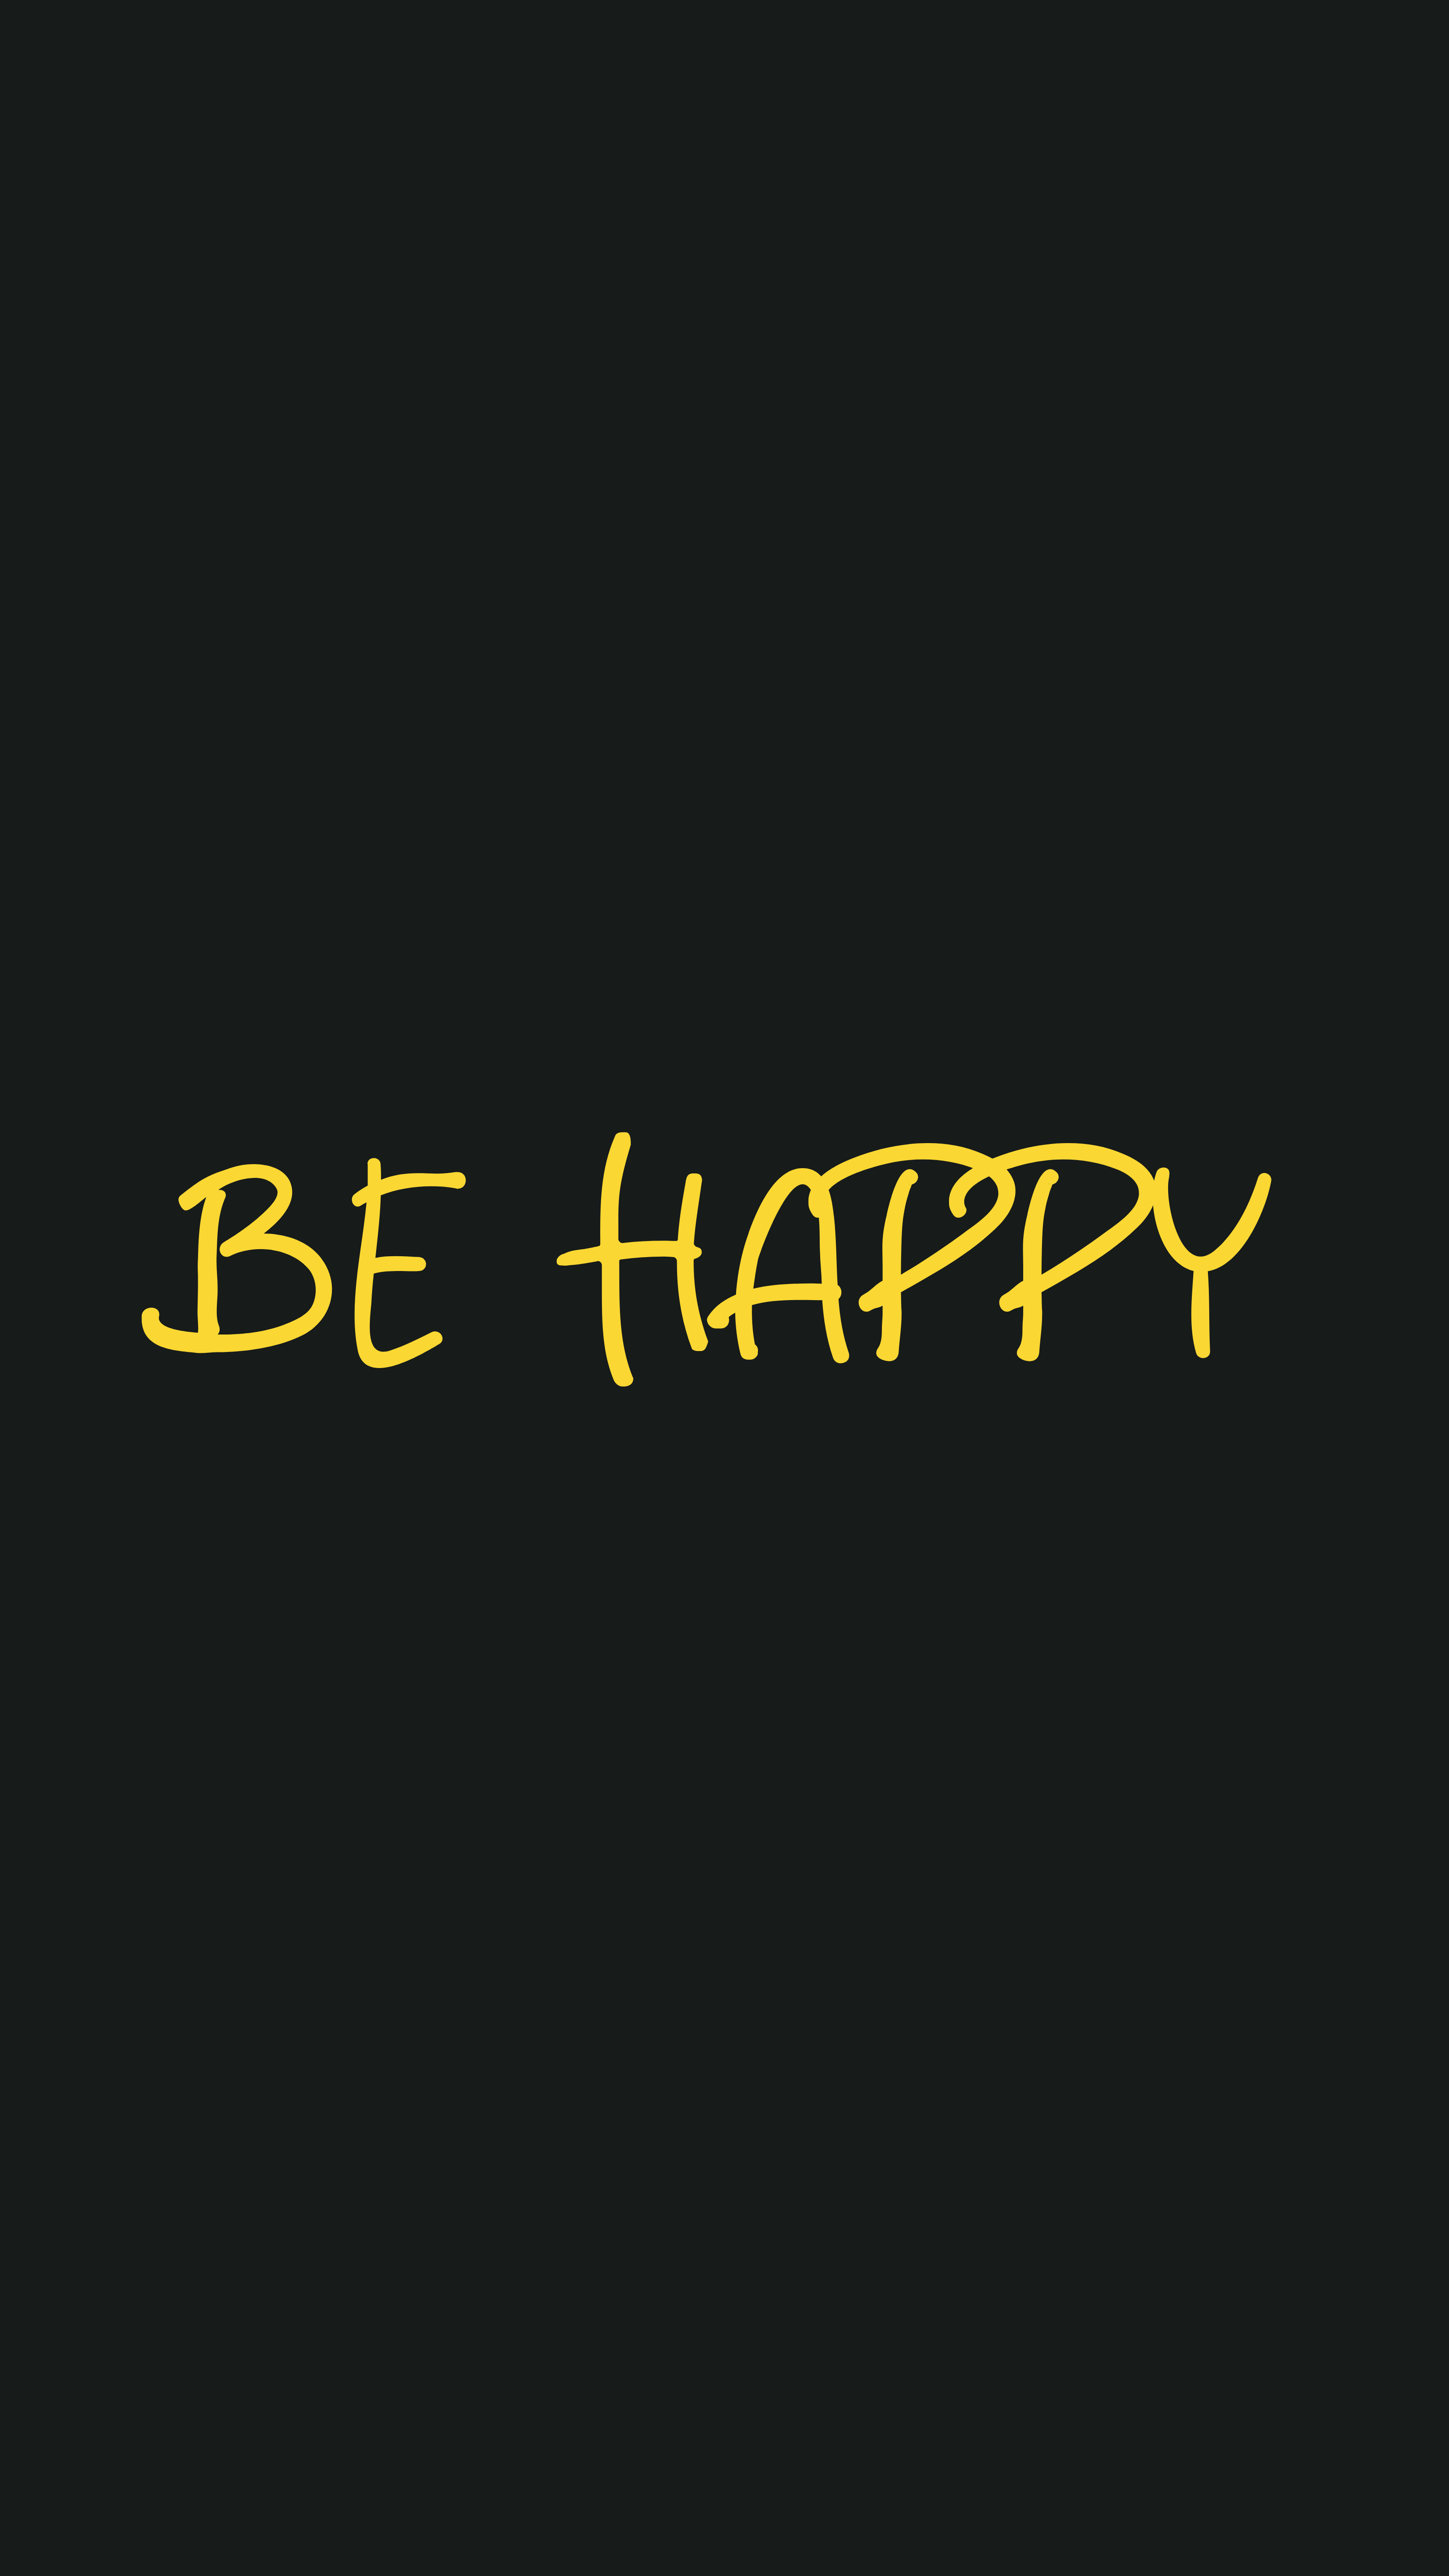 motivation, happiness, mood, words, phrase, inscription wallpaper for mobile